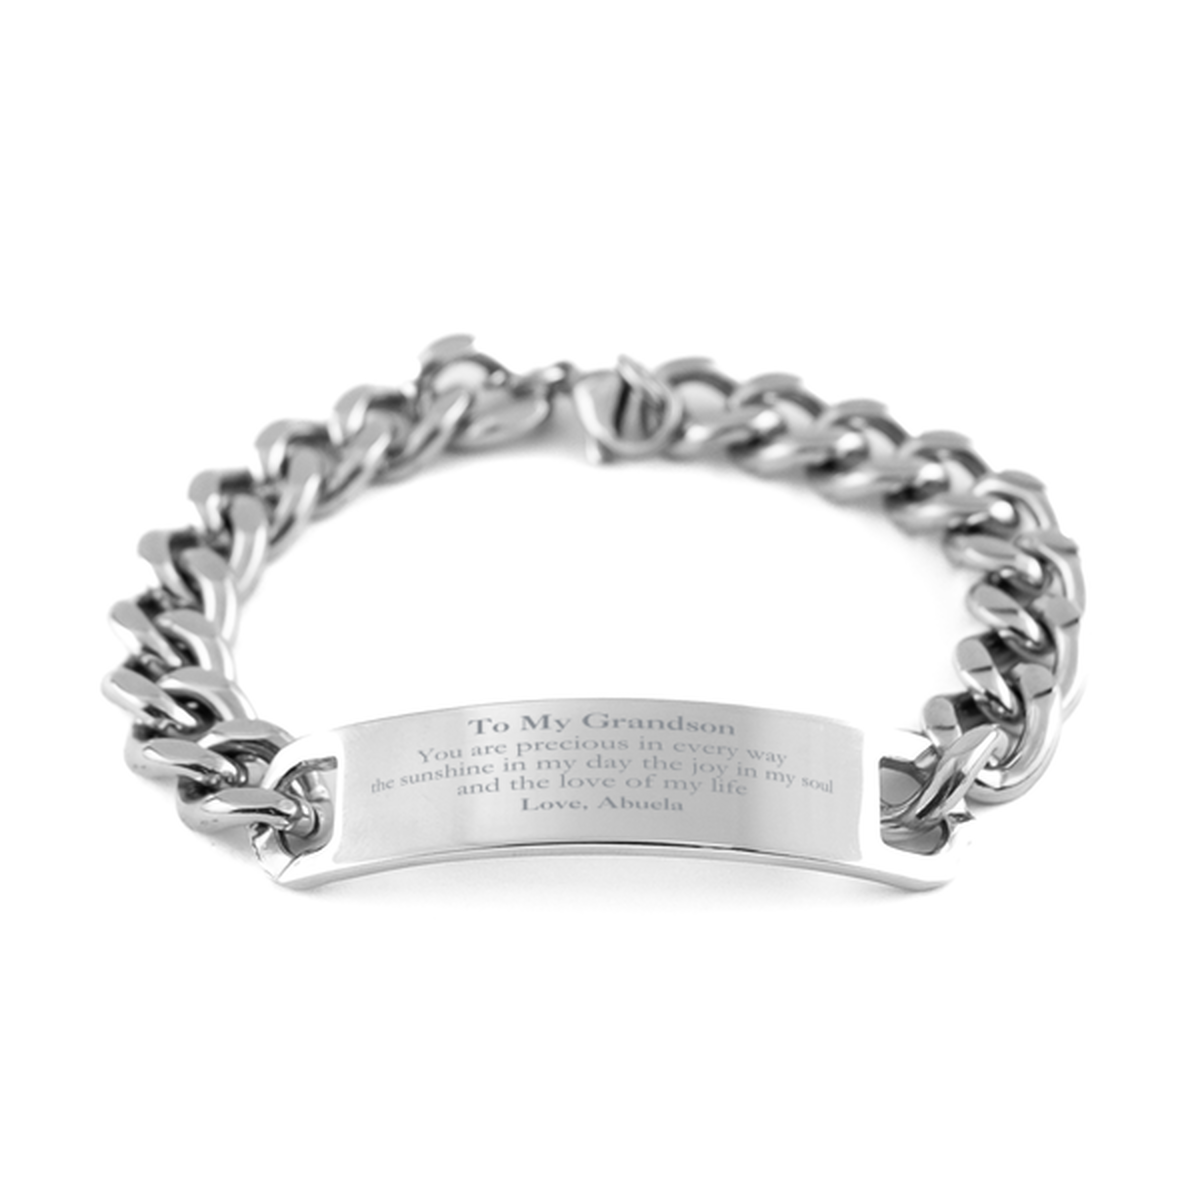 Graduation Gifts for Grandson Cuban Chain Stainless Steel Bracelet Present from Abuela, Christmas Grandson Birthday Gifts Grandson You are precious in every way the sunshine in my day. Love, Abuela